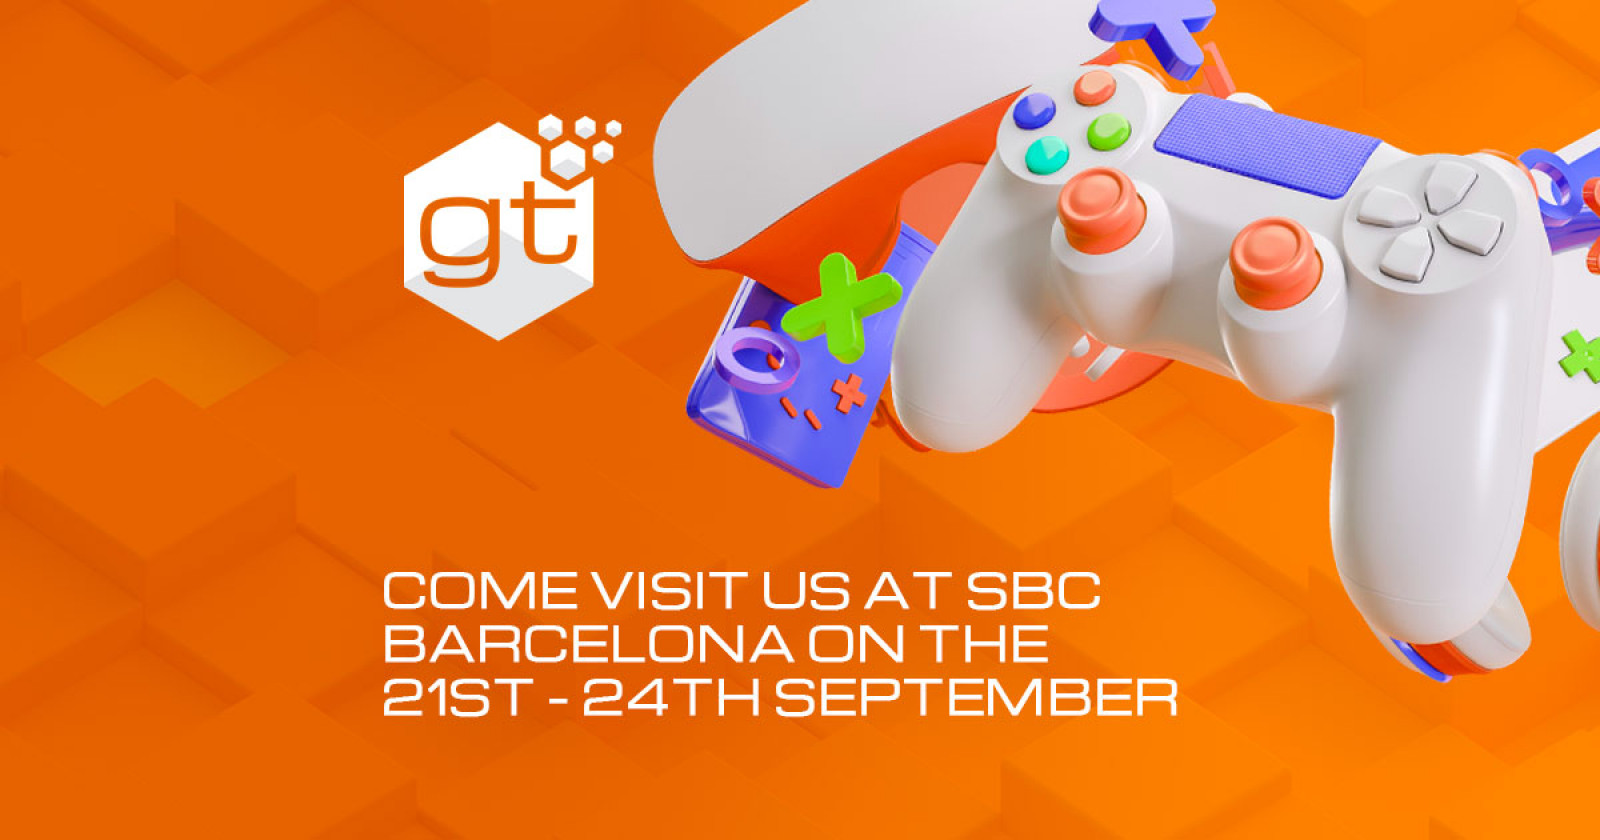 Come visit us at SBC Barcelona on the 21st - 24th September